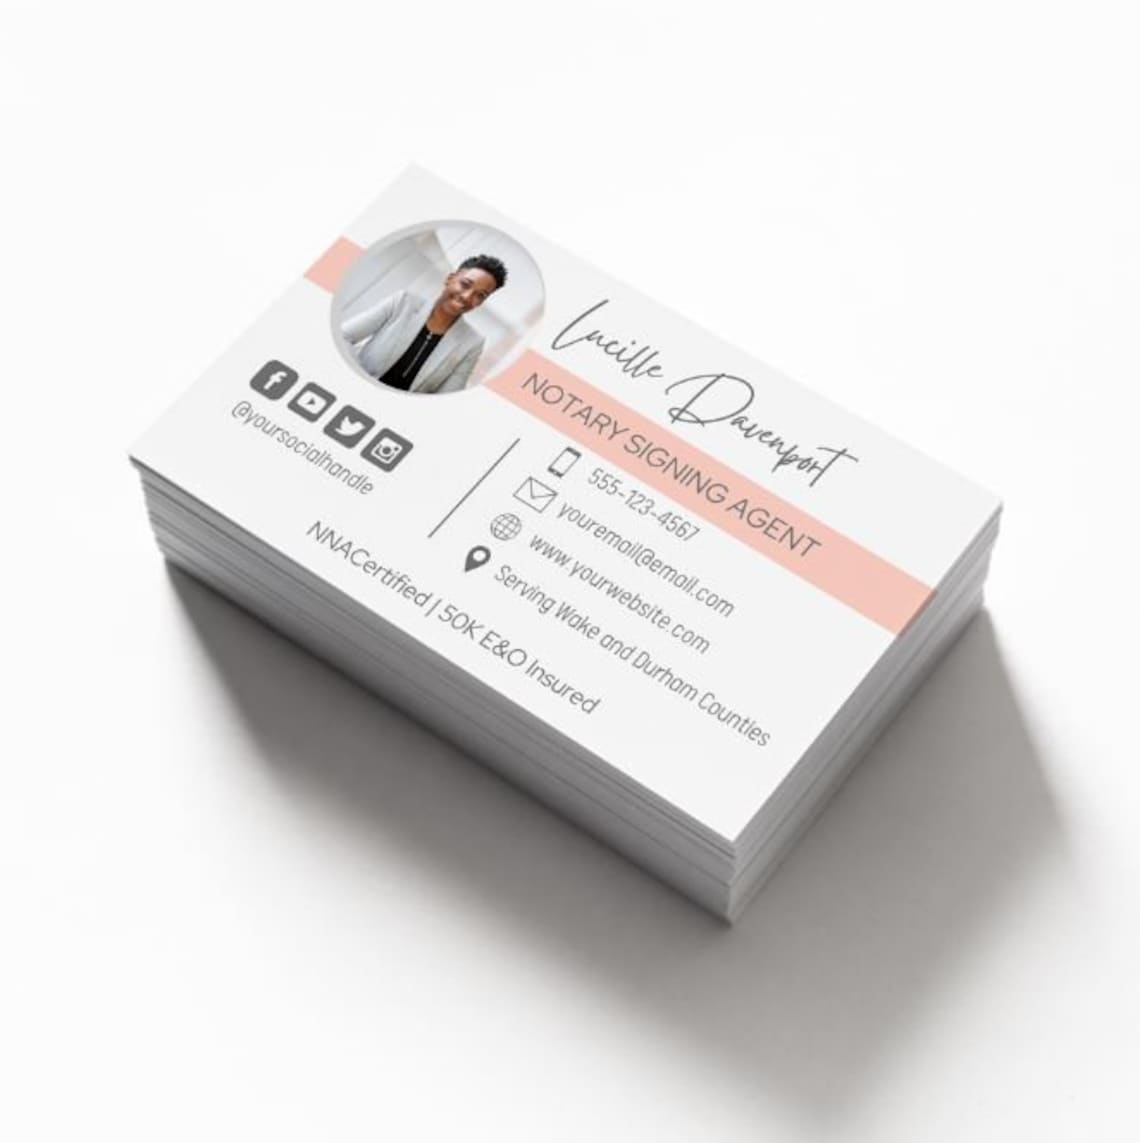 Notary Business Cards Templates: A Perfect Way to Make a Professional ...